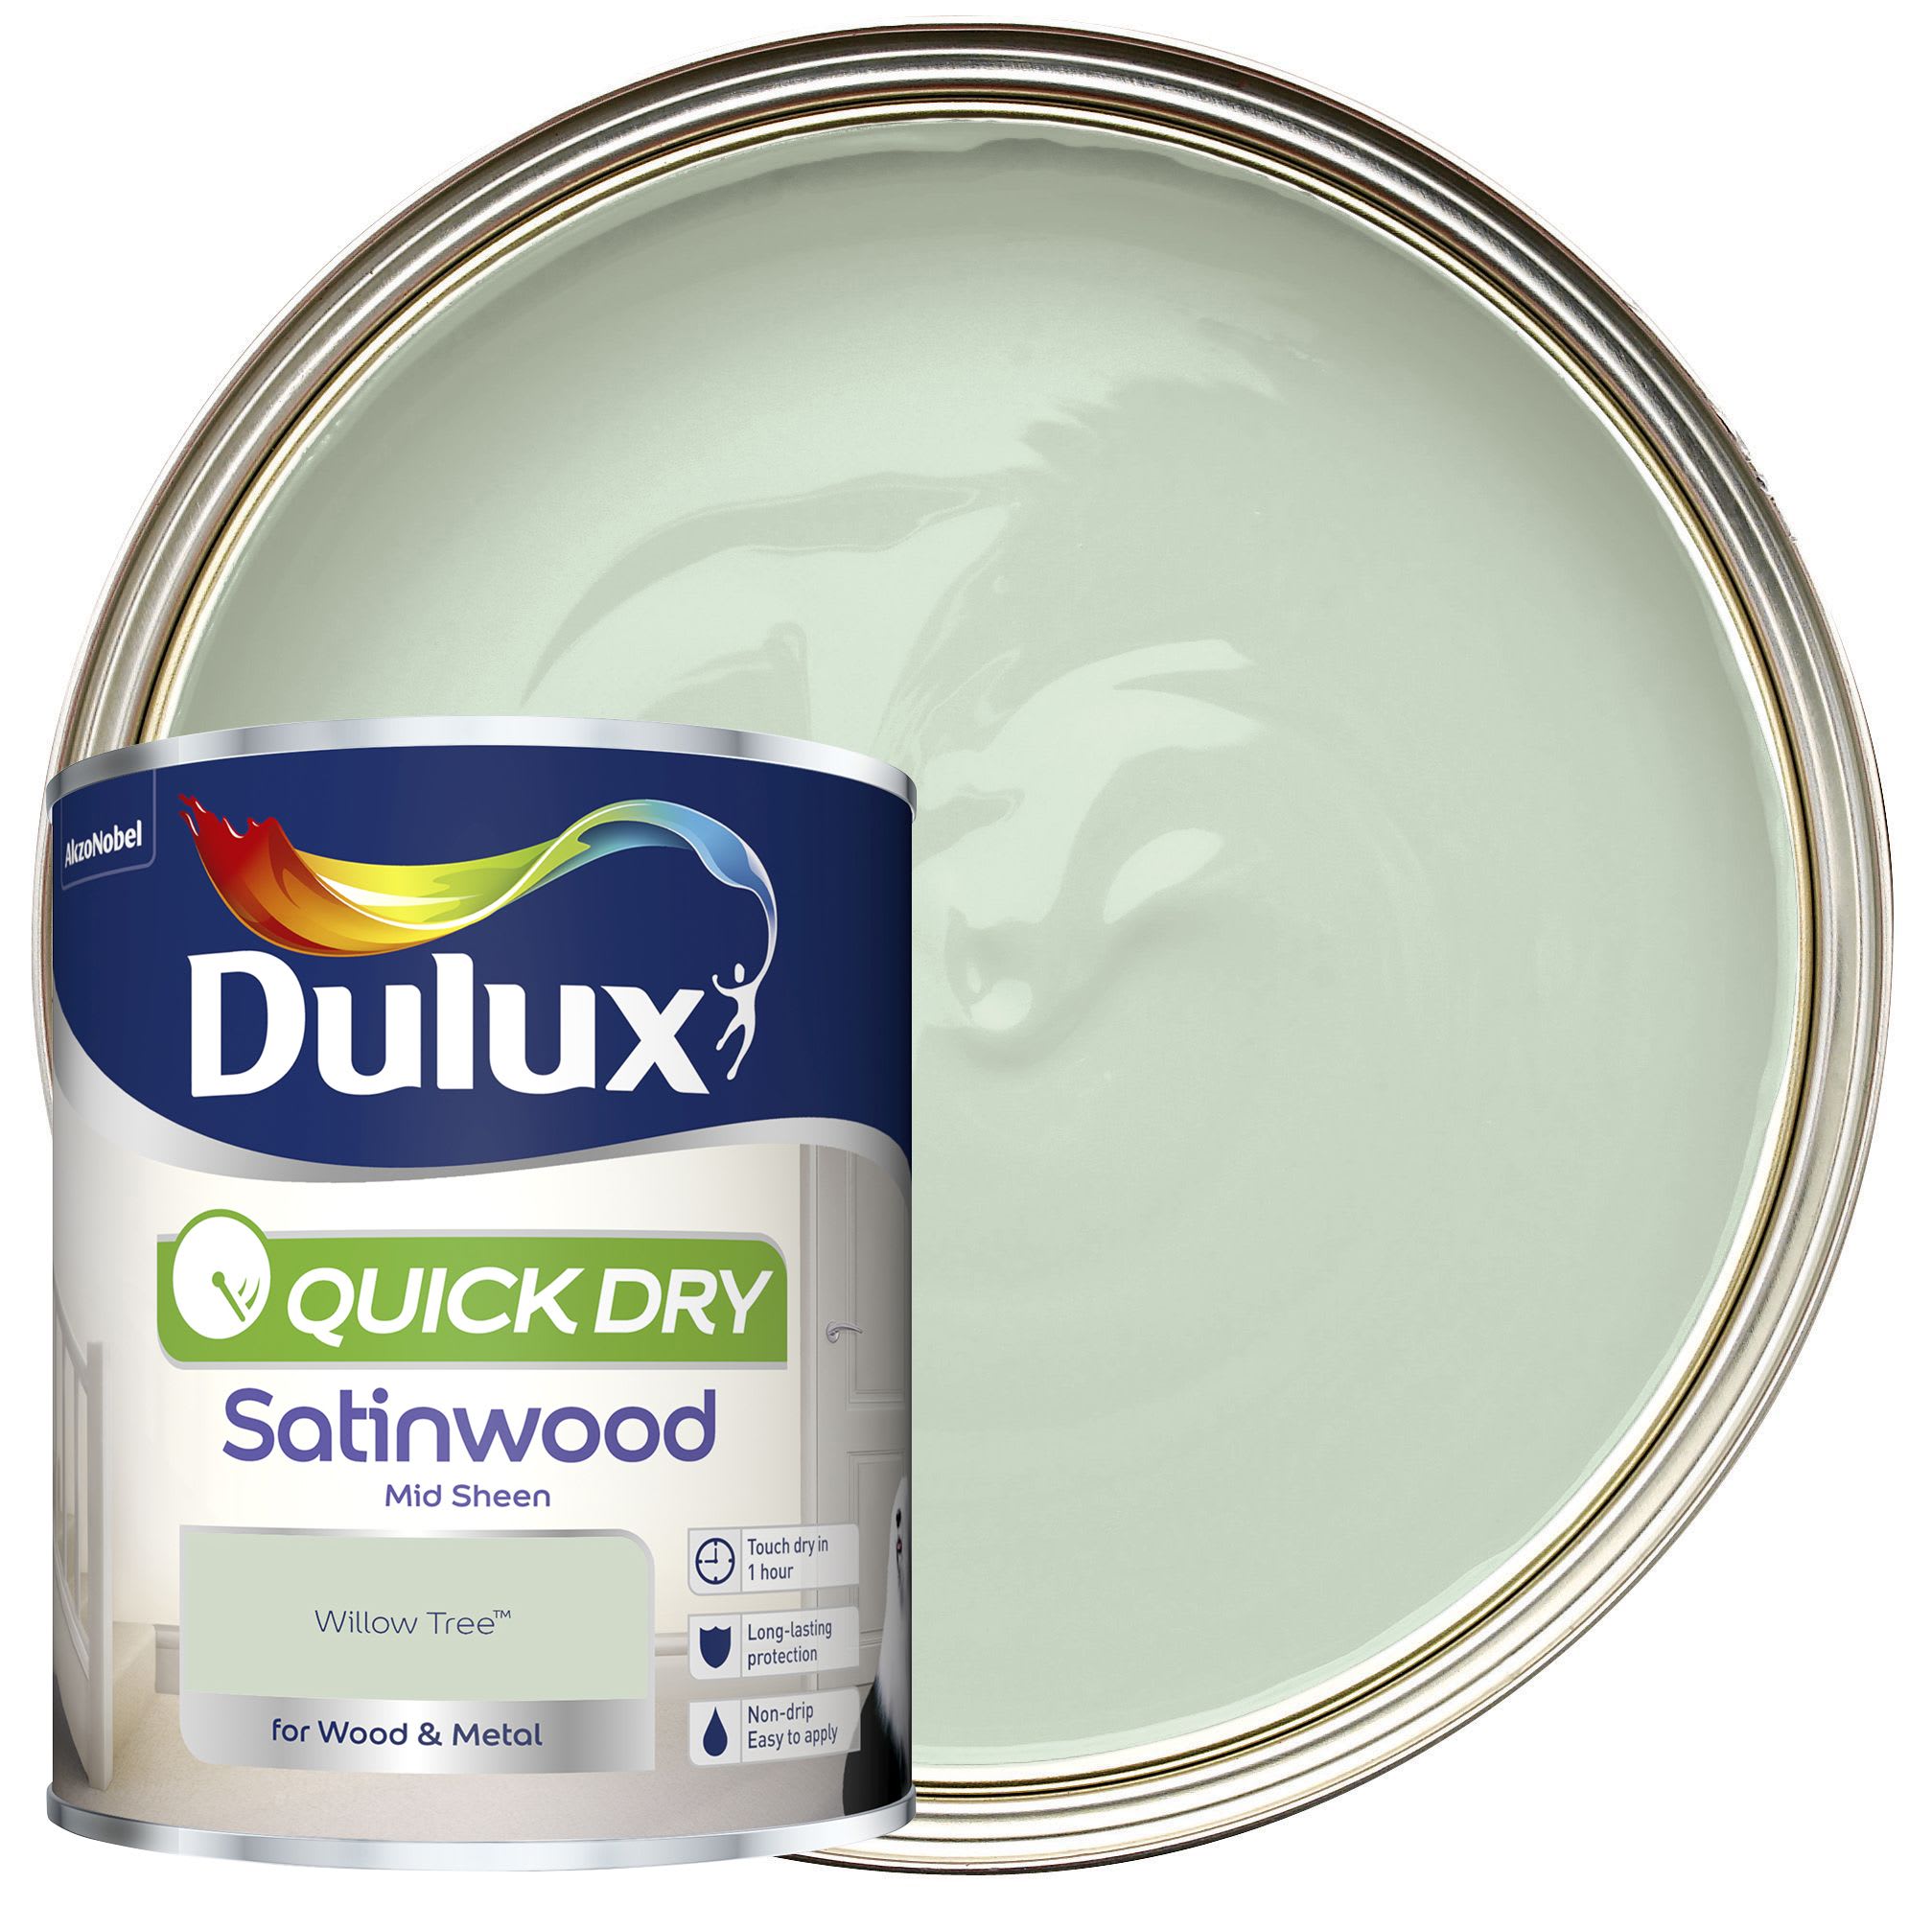 Dulux Quick Dry Satinwood Paint - Willow Tree